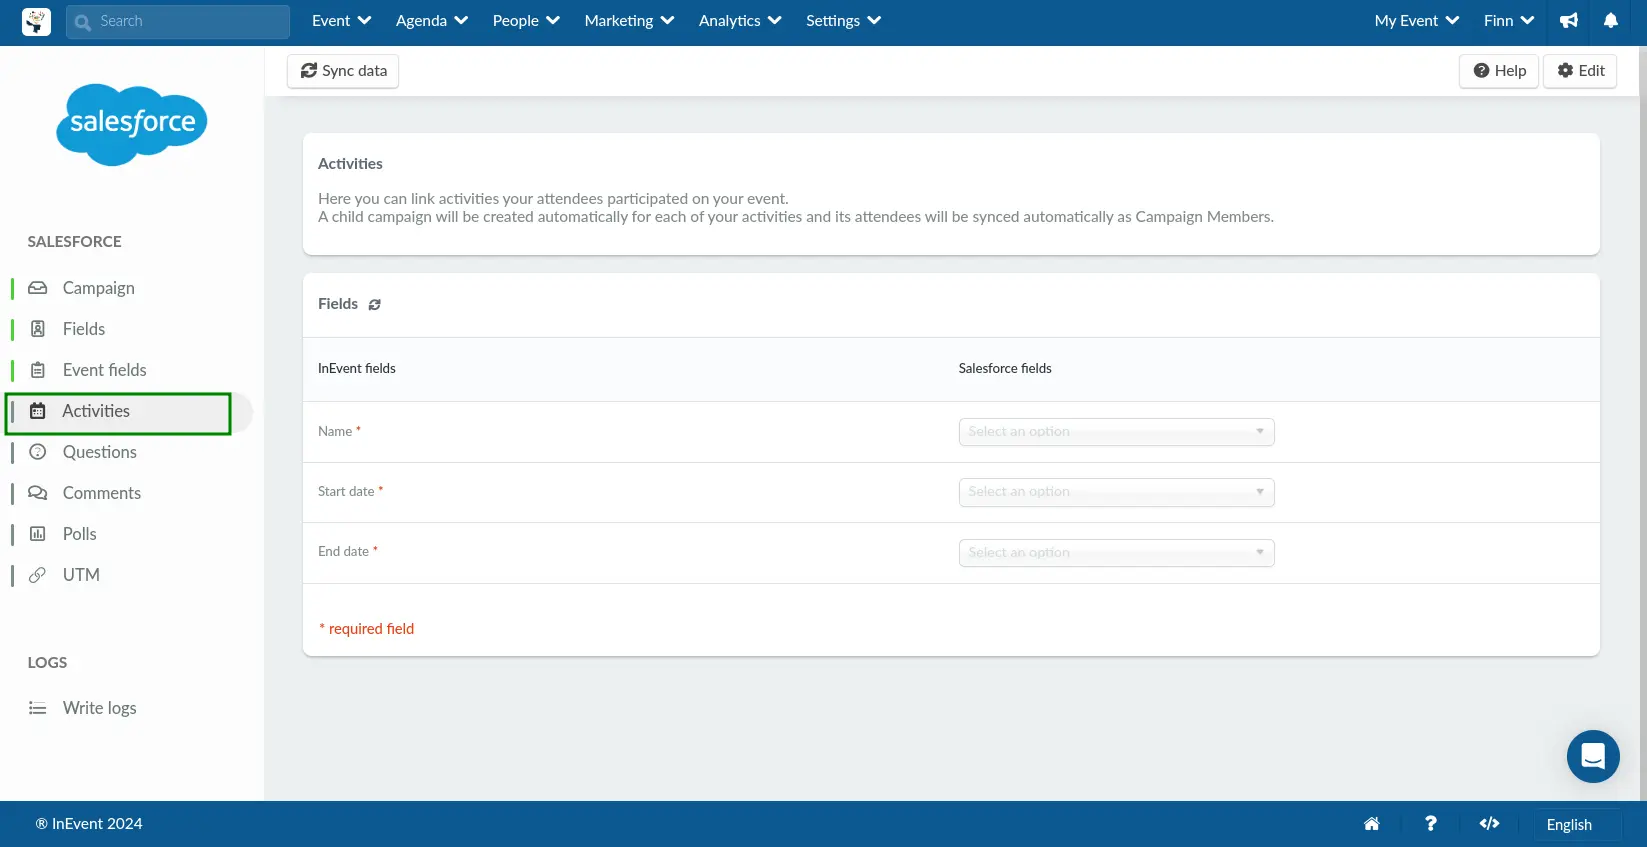 Screenshot showing the Activities tab in InEvent's Salesforce integration page.